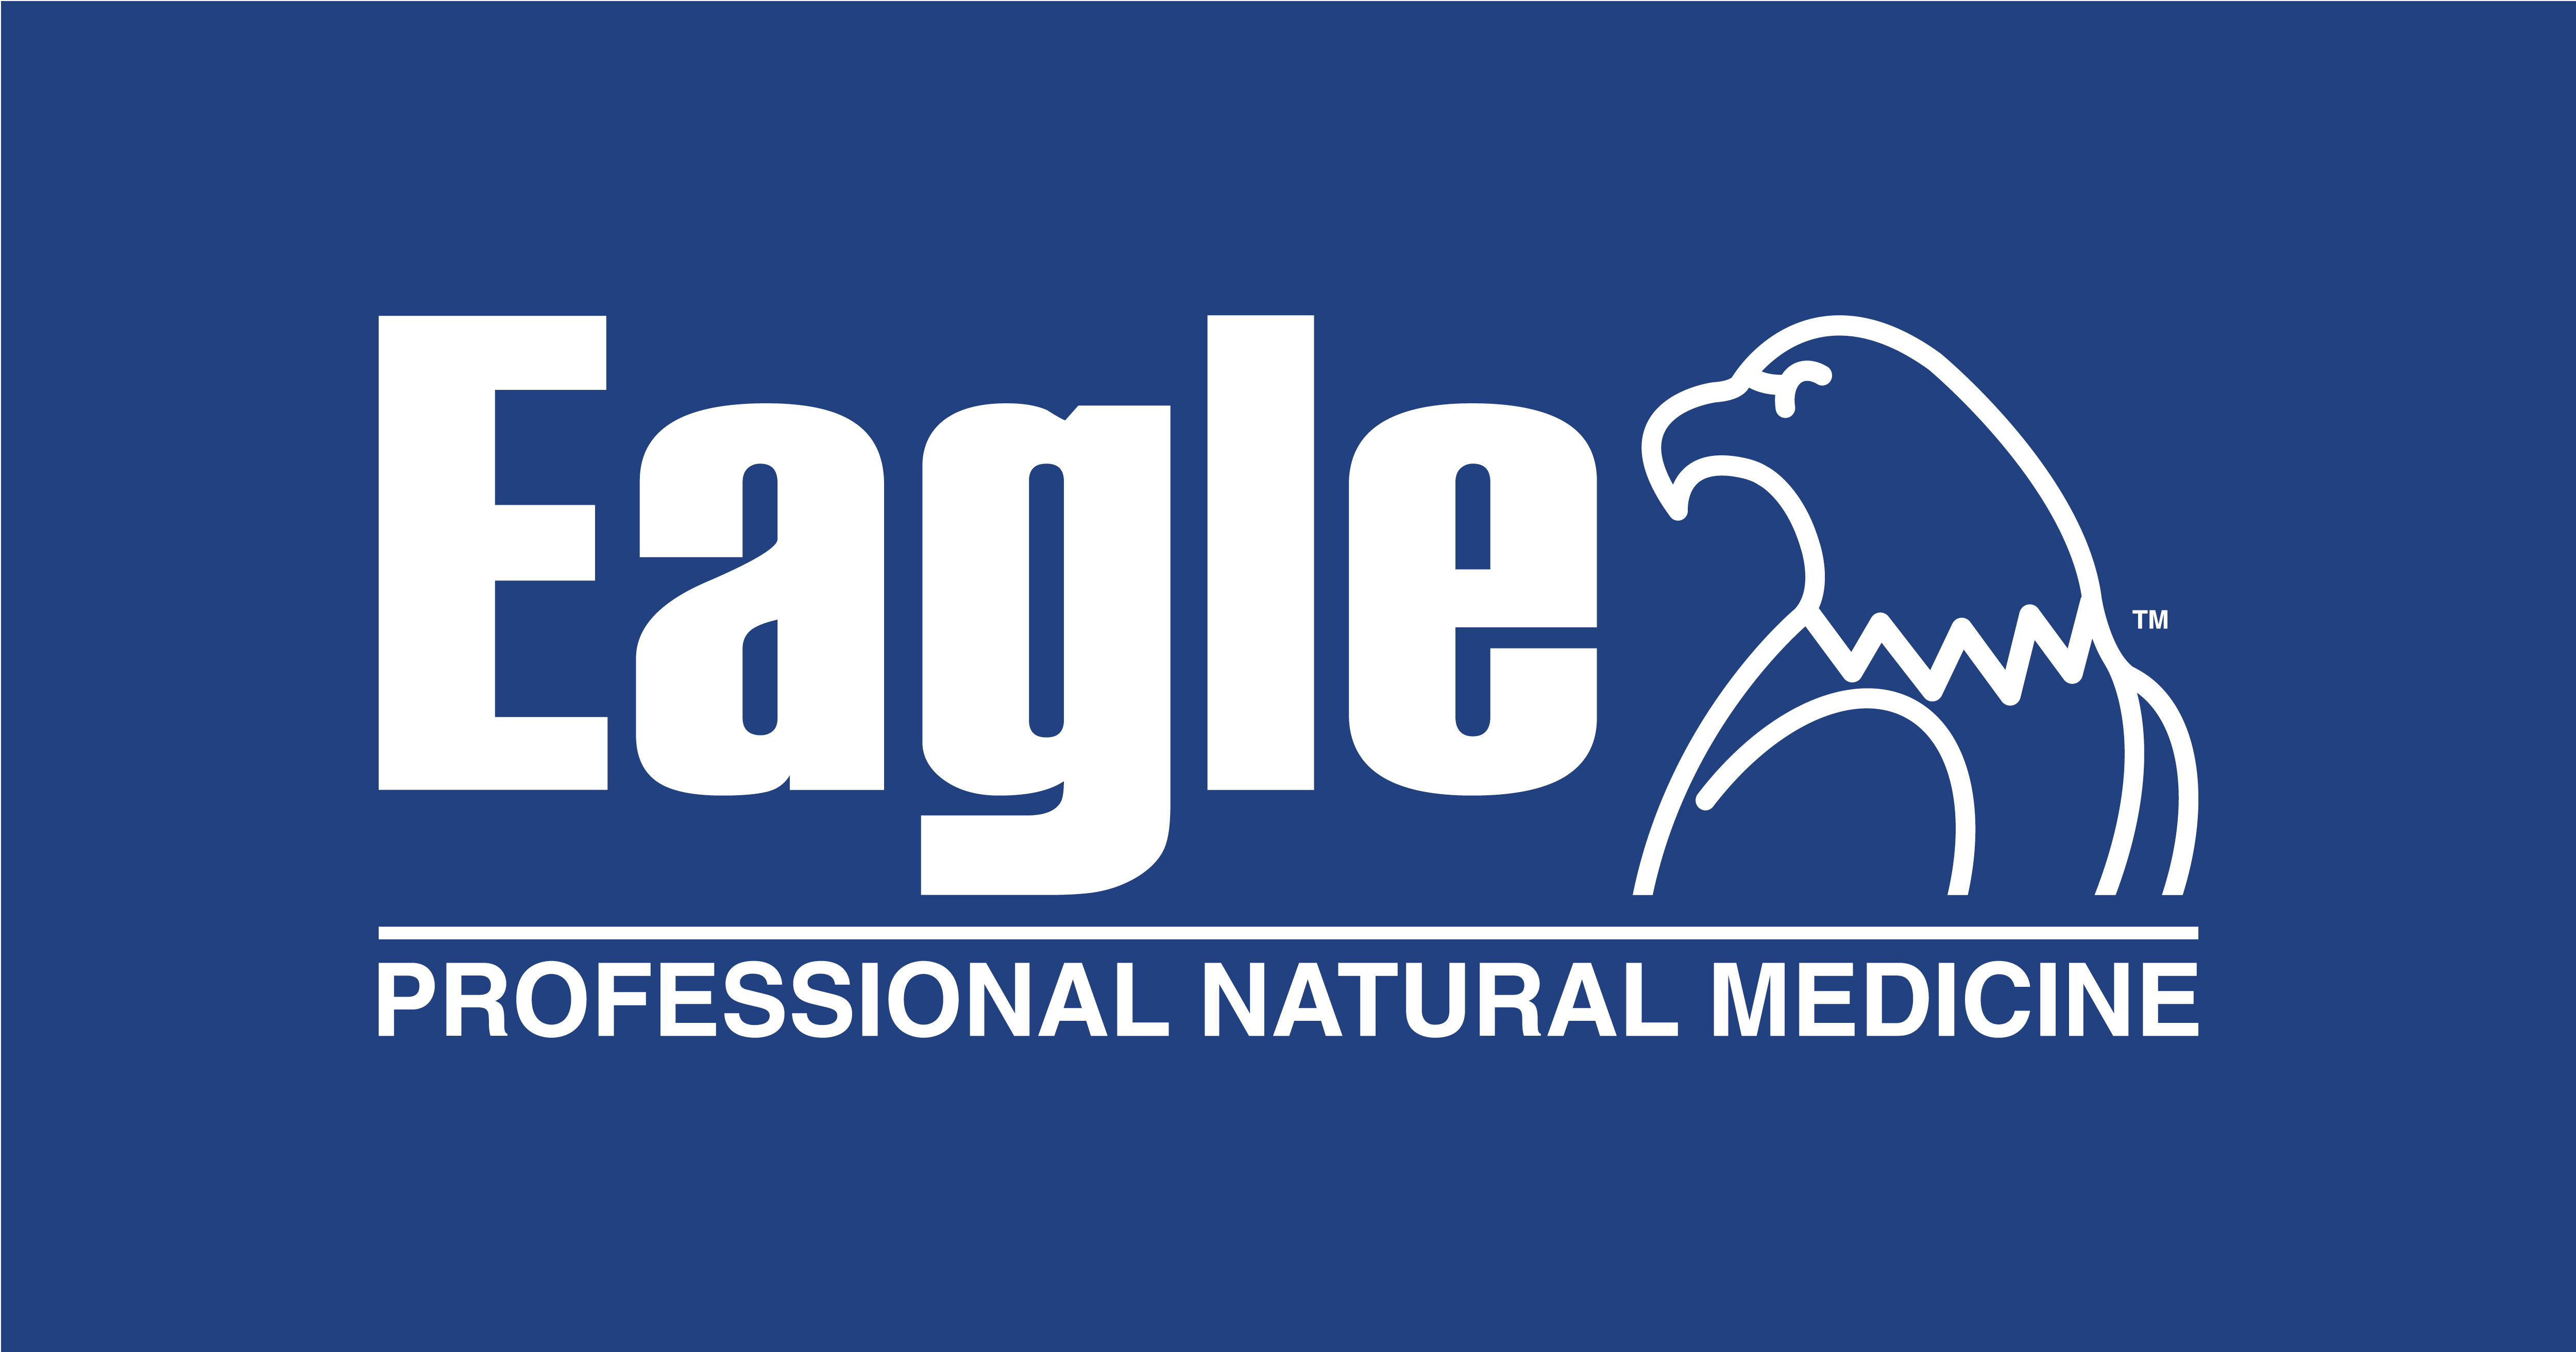 View products from Eagle